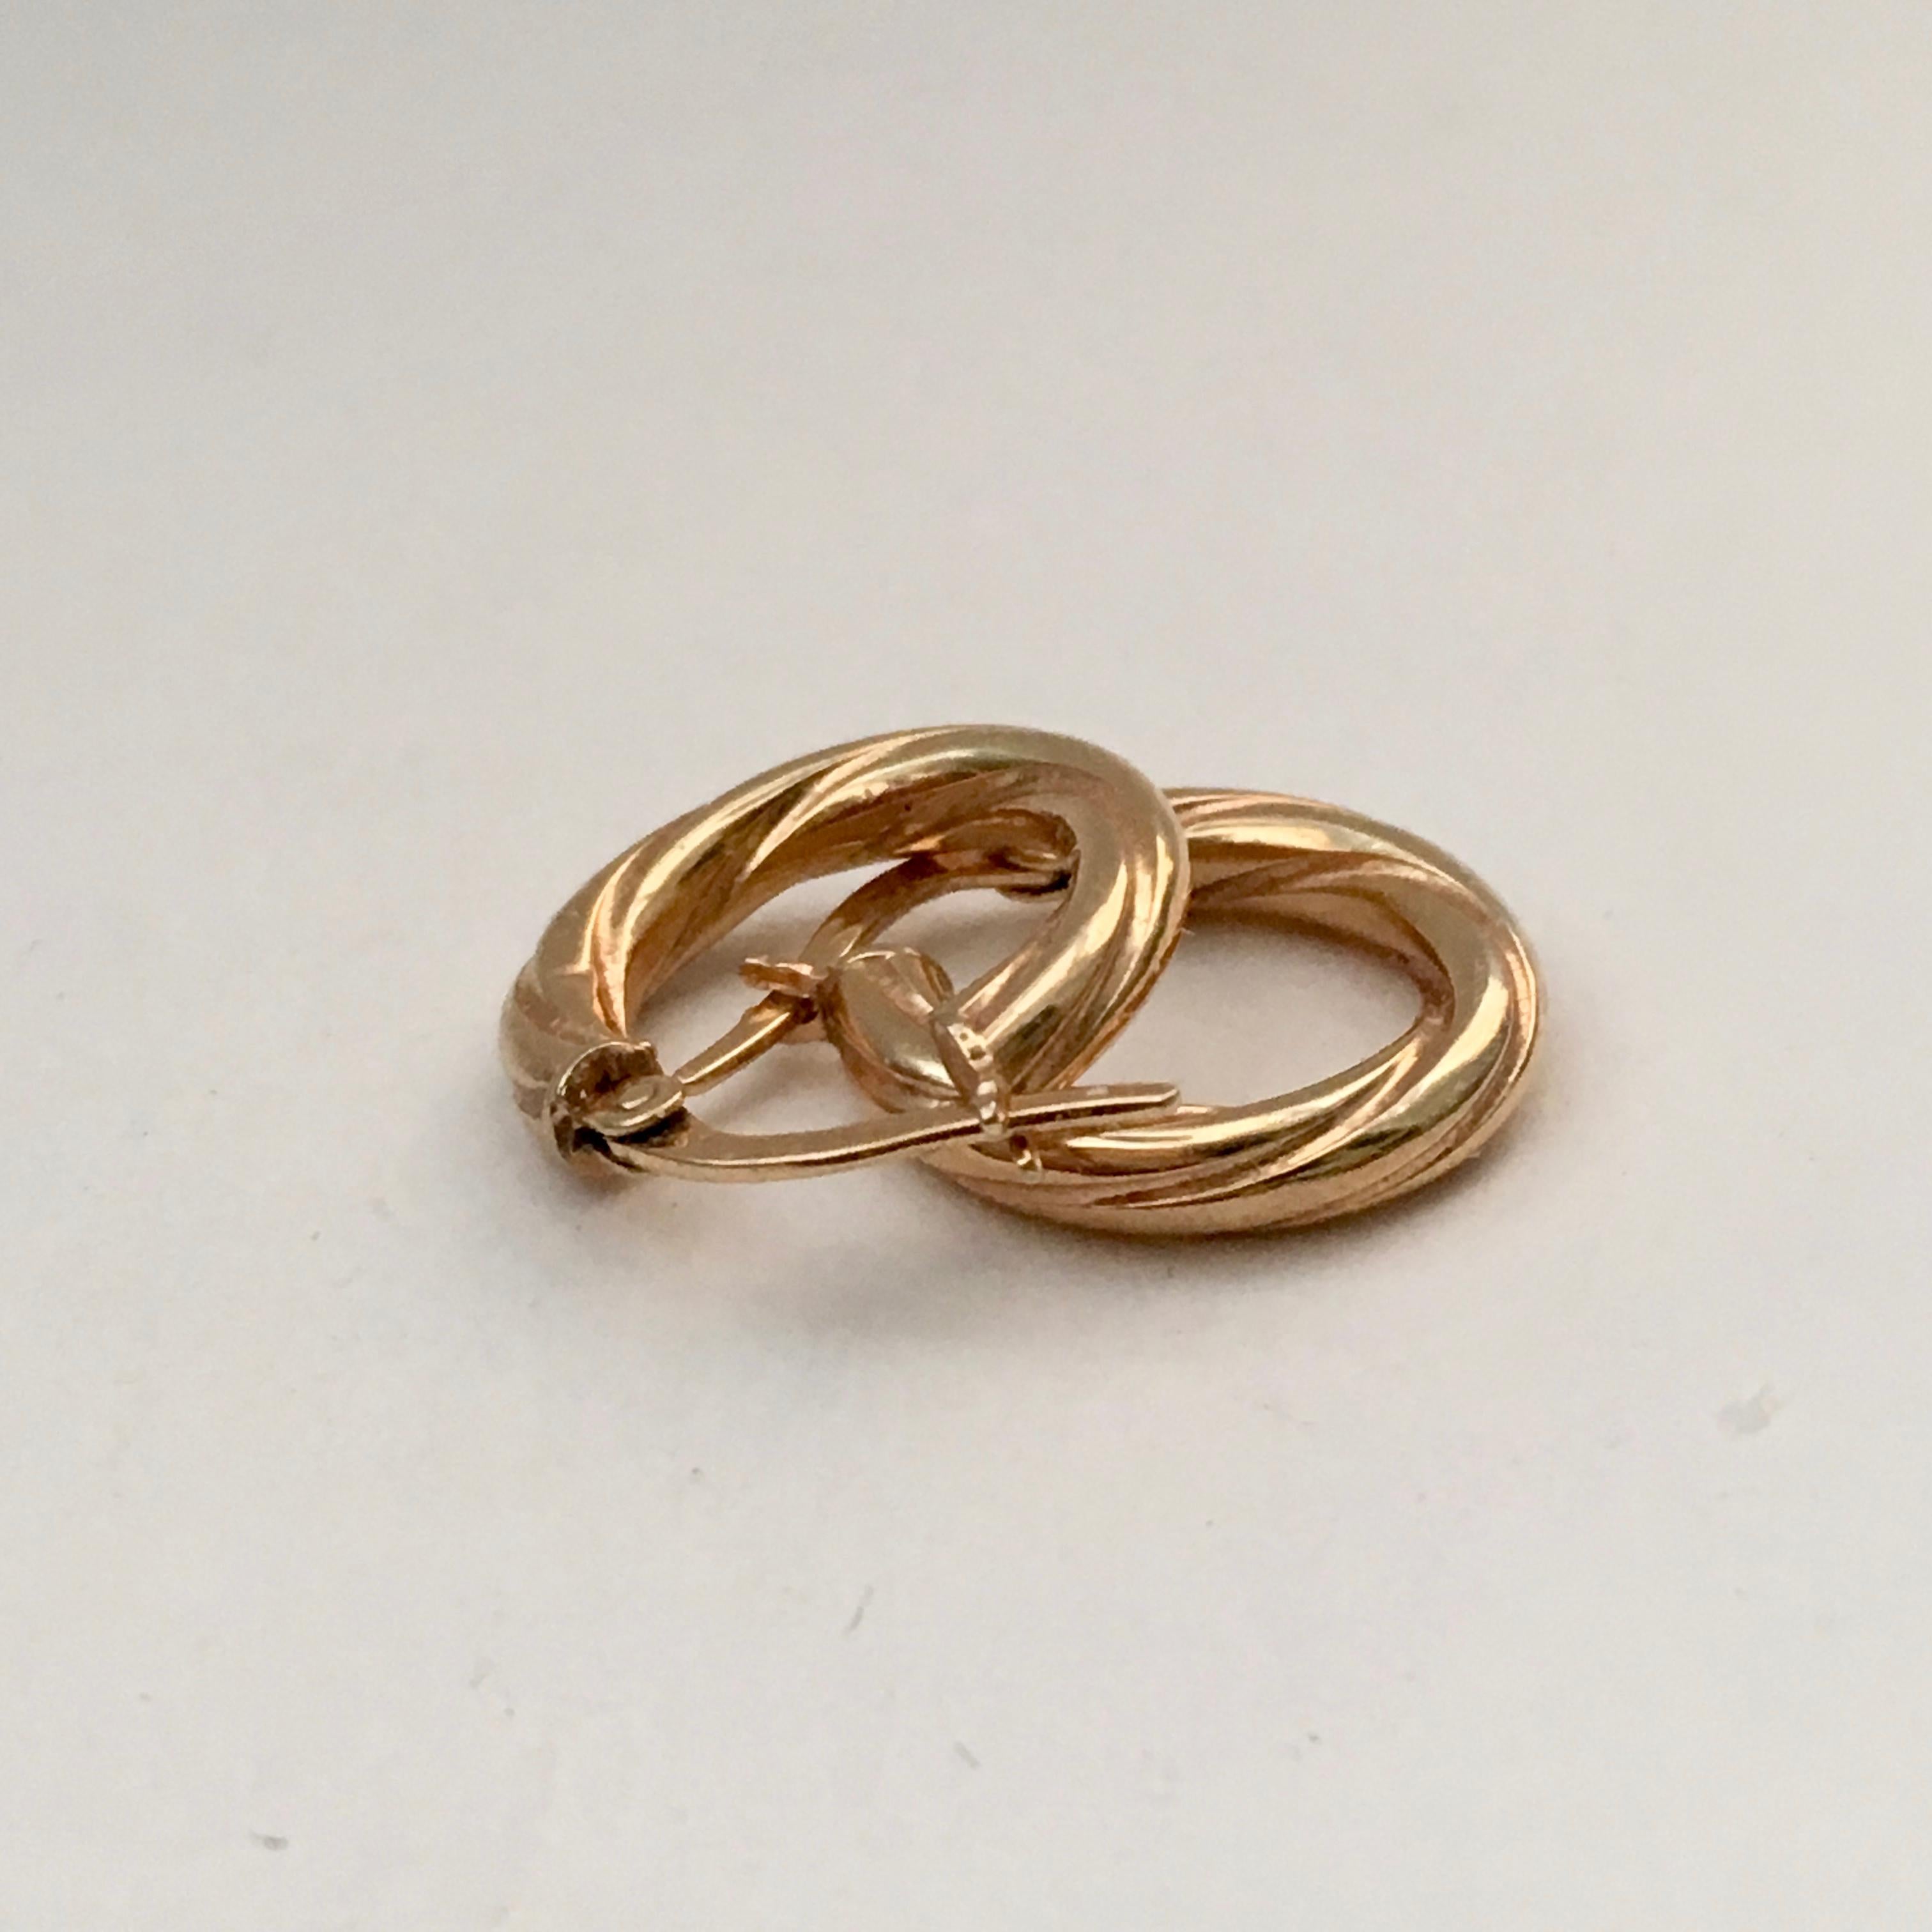 Vintage Gold Hoops Small Twisted Braided Hoop Earrings Yellow Gold For Sale 1